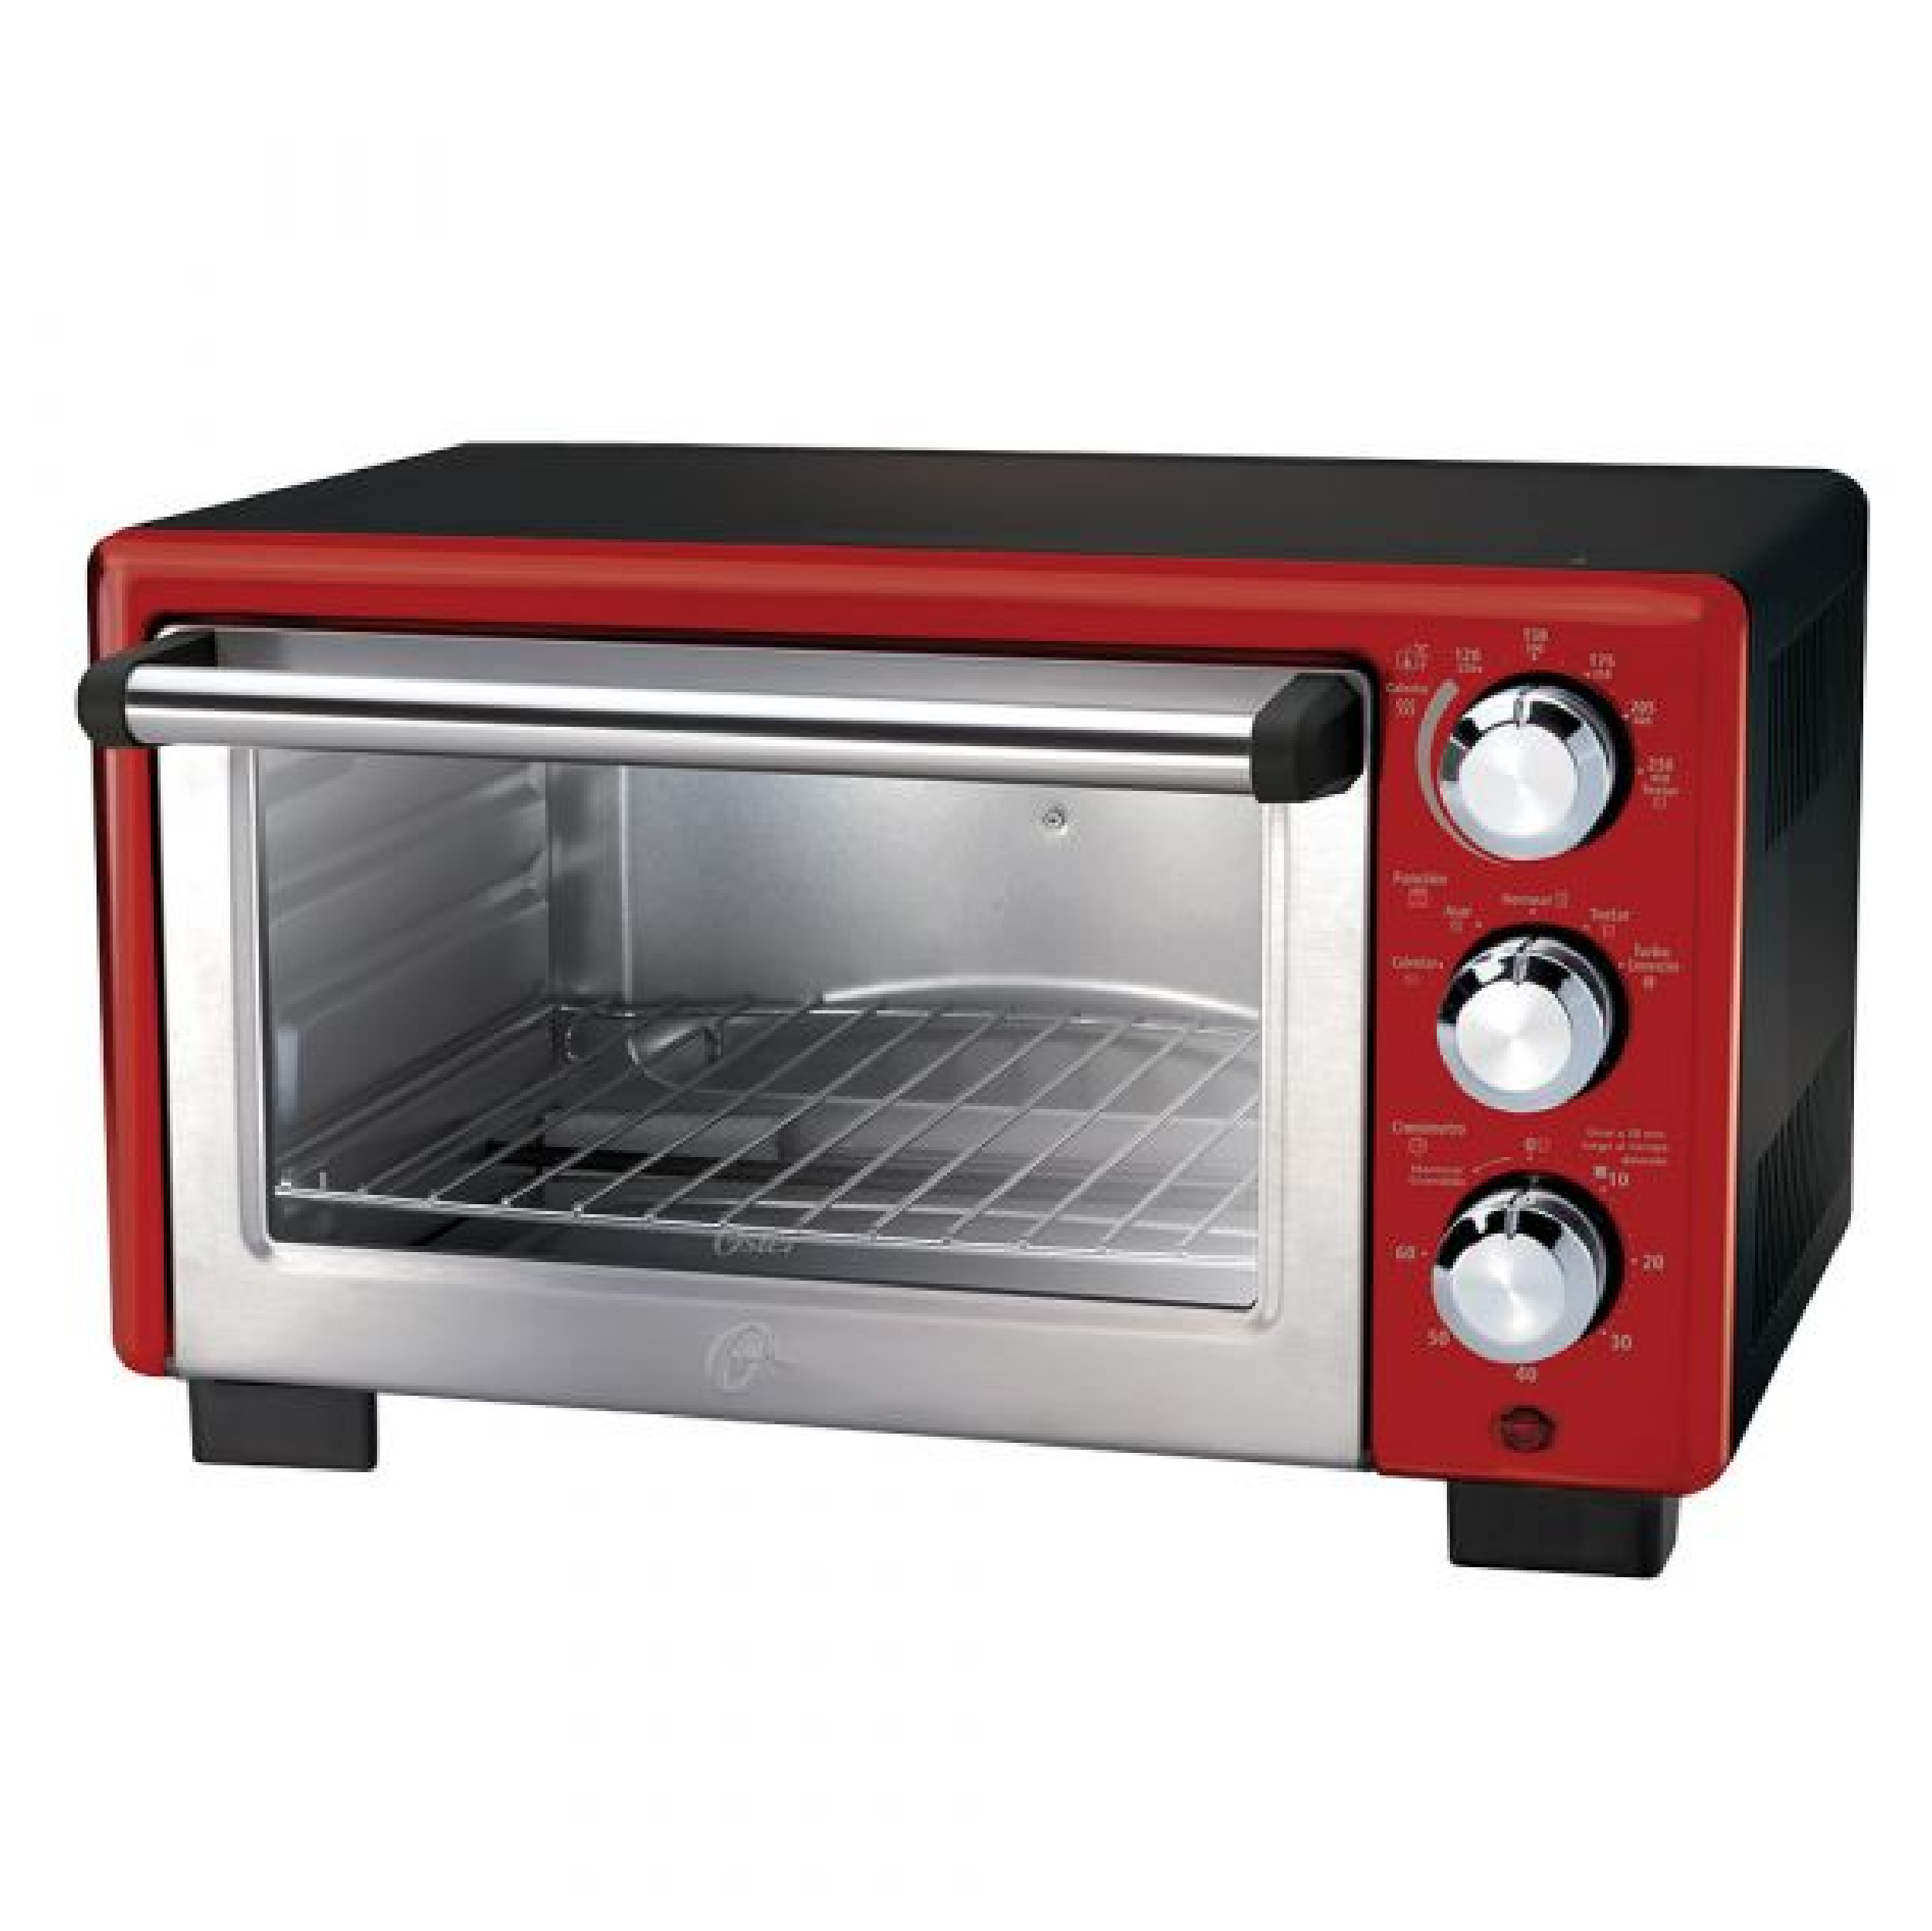 Horno Electrico Oster Acero Inox Tssttv7118R-057 1400W